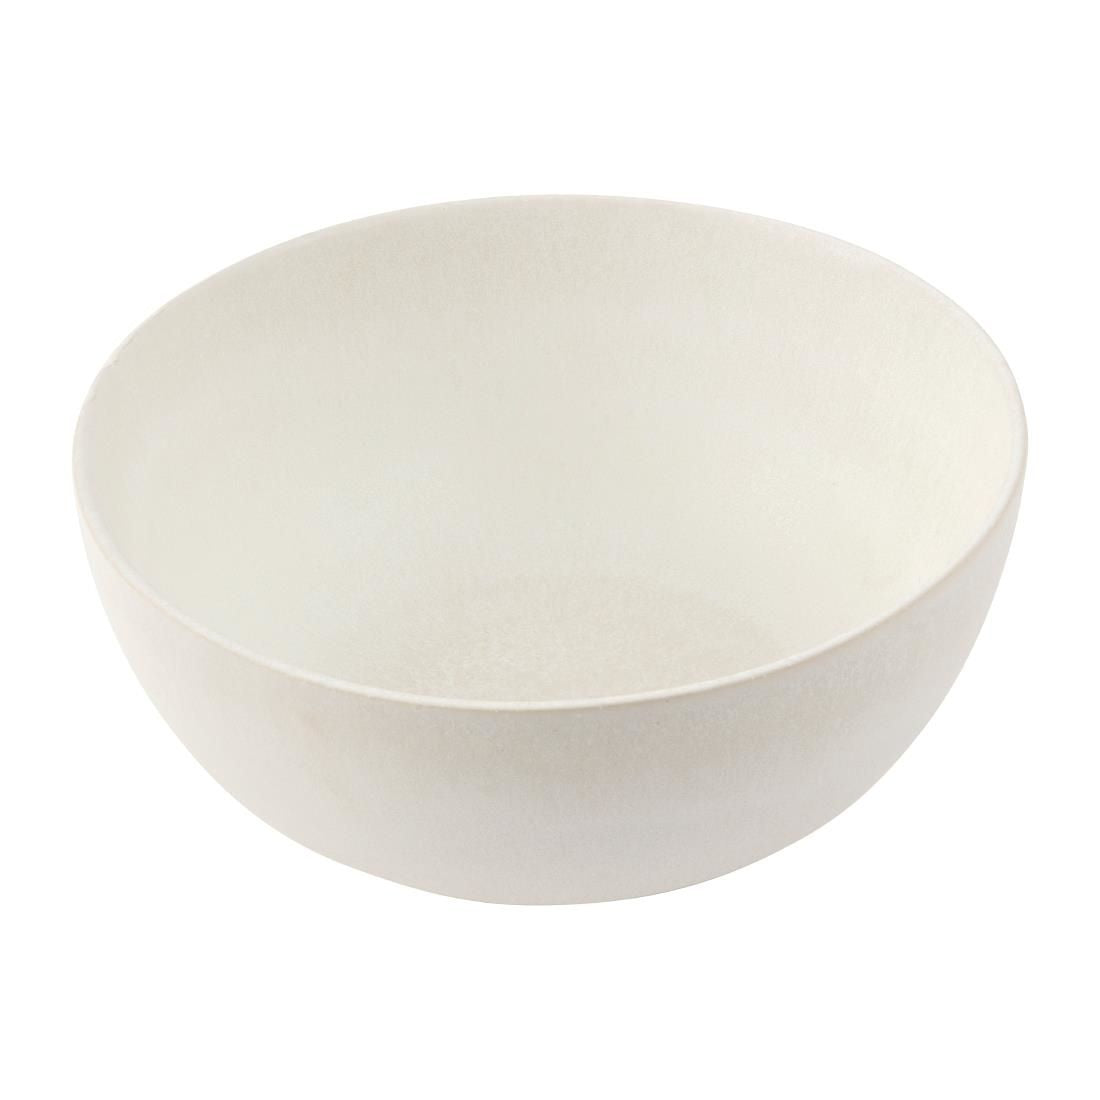 FC701 Olympia Build-a-Bowl White Deep Bowls 150mm (Pack of 6) JD Catering Equipment Solutions Ltd